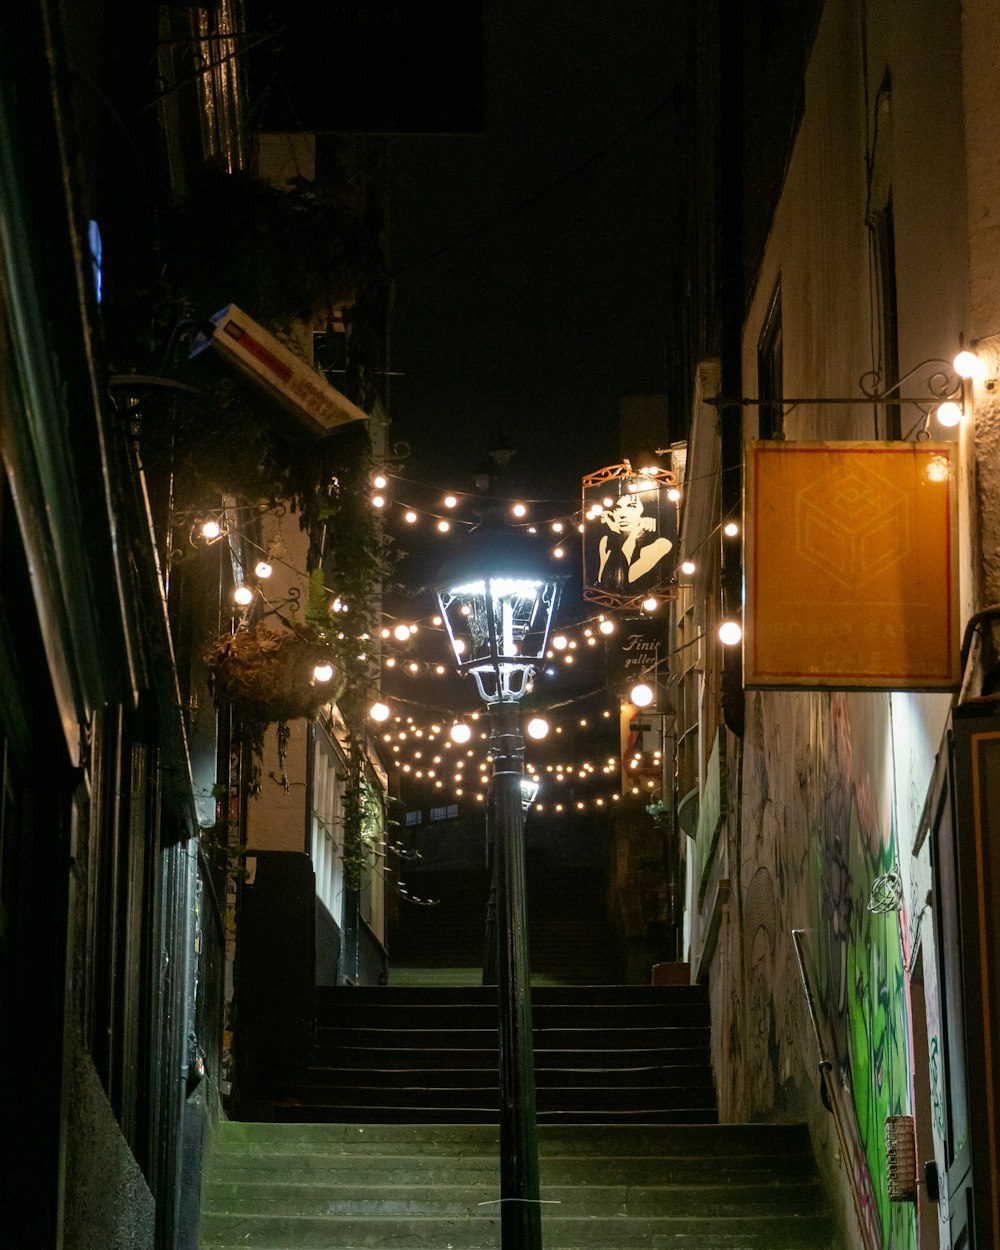 a stairway with lights and a basketball hoop